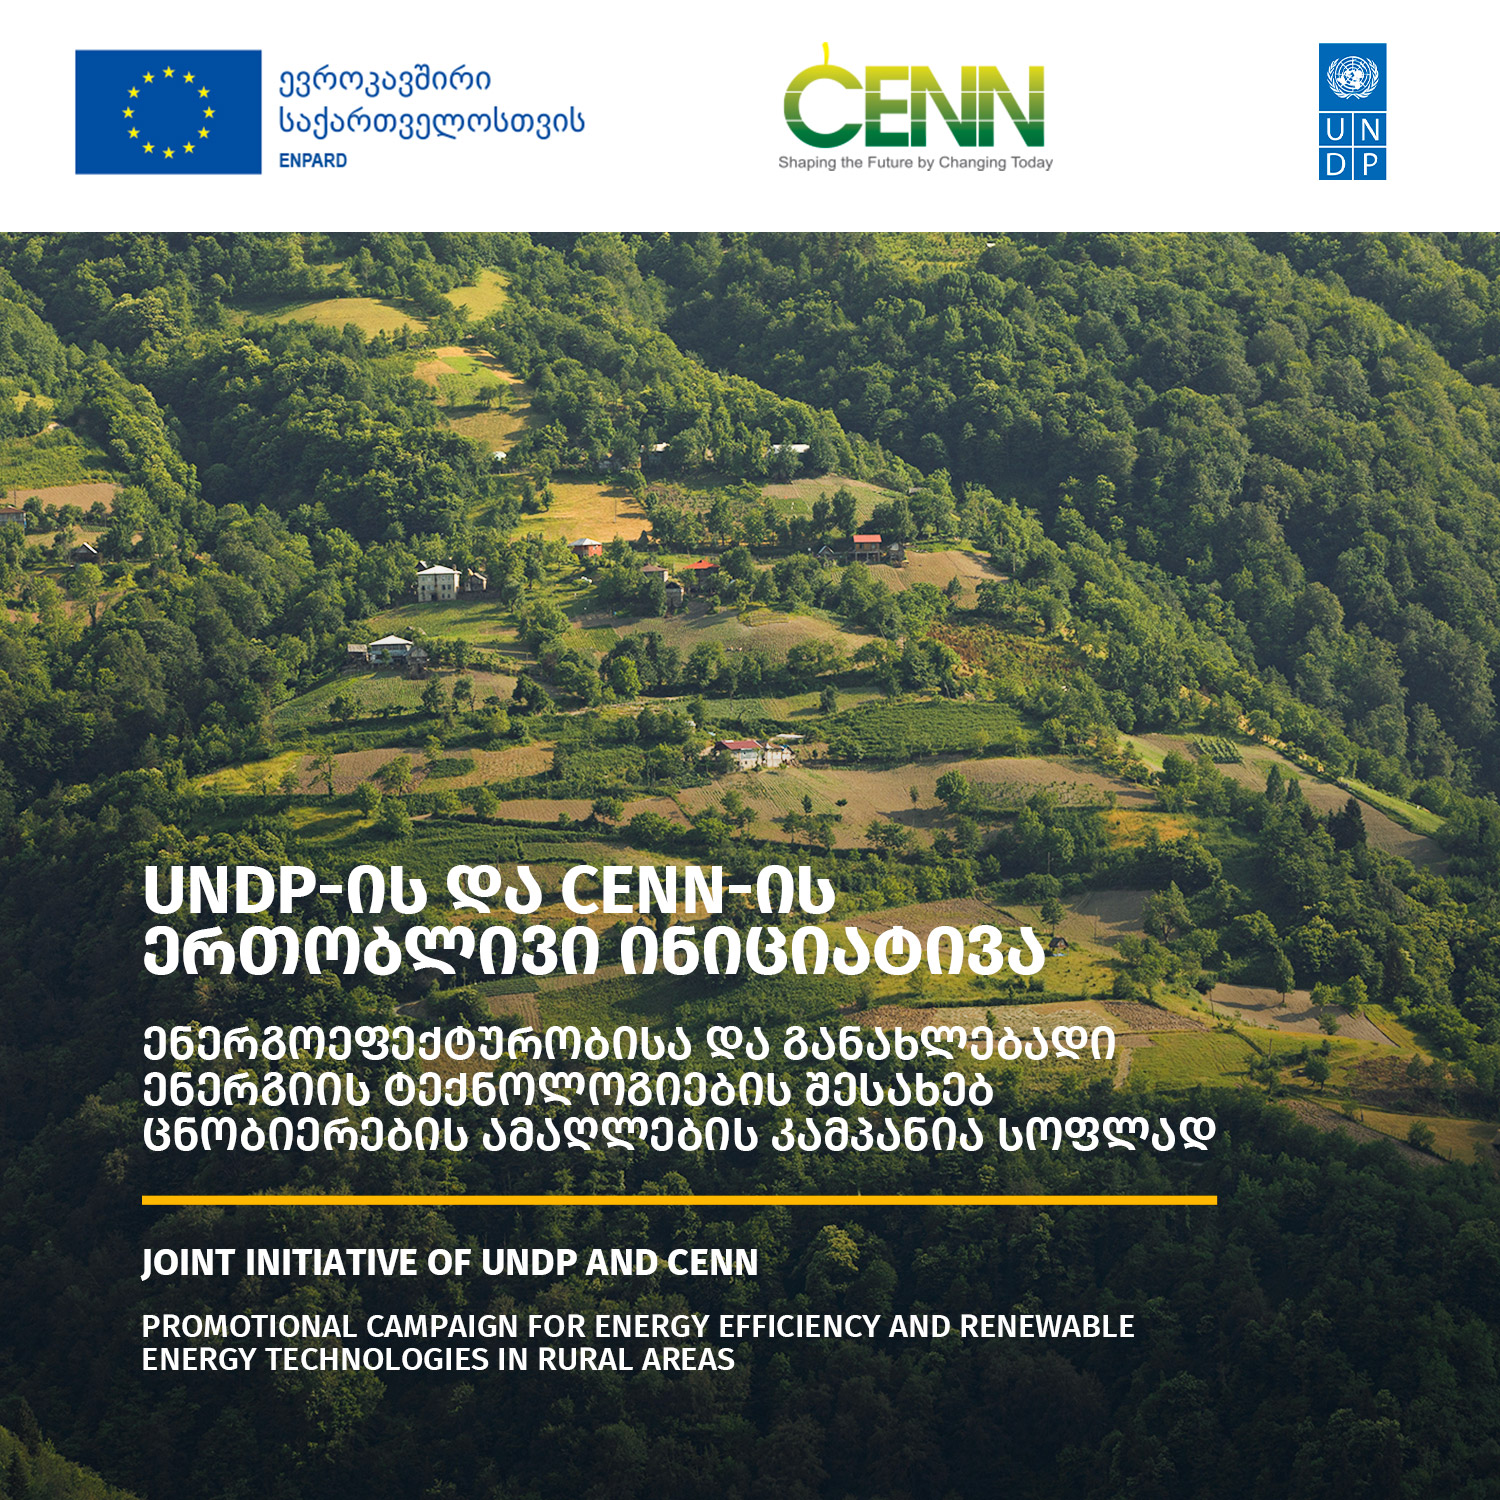 CENN and UNDP Start a New Joint Initiative – Implementation of a Promotional Campaign for Energy Efficiency and Renewable Energy Technologies in Rural Areas